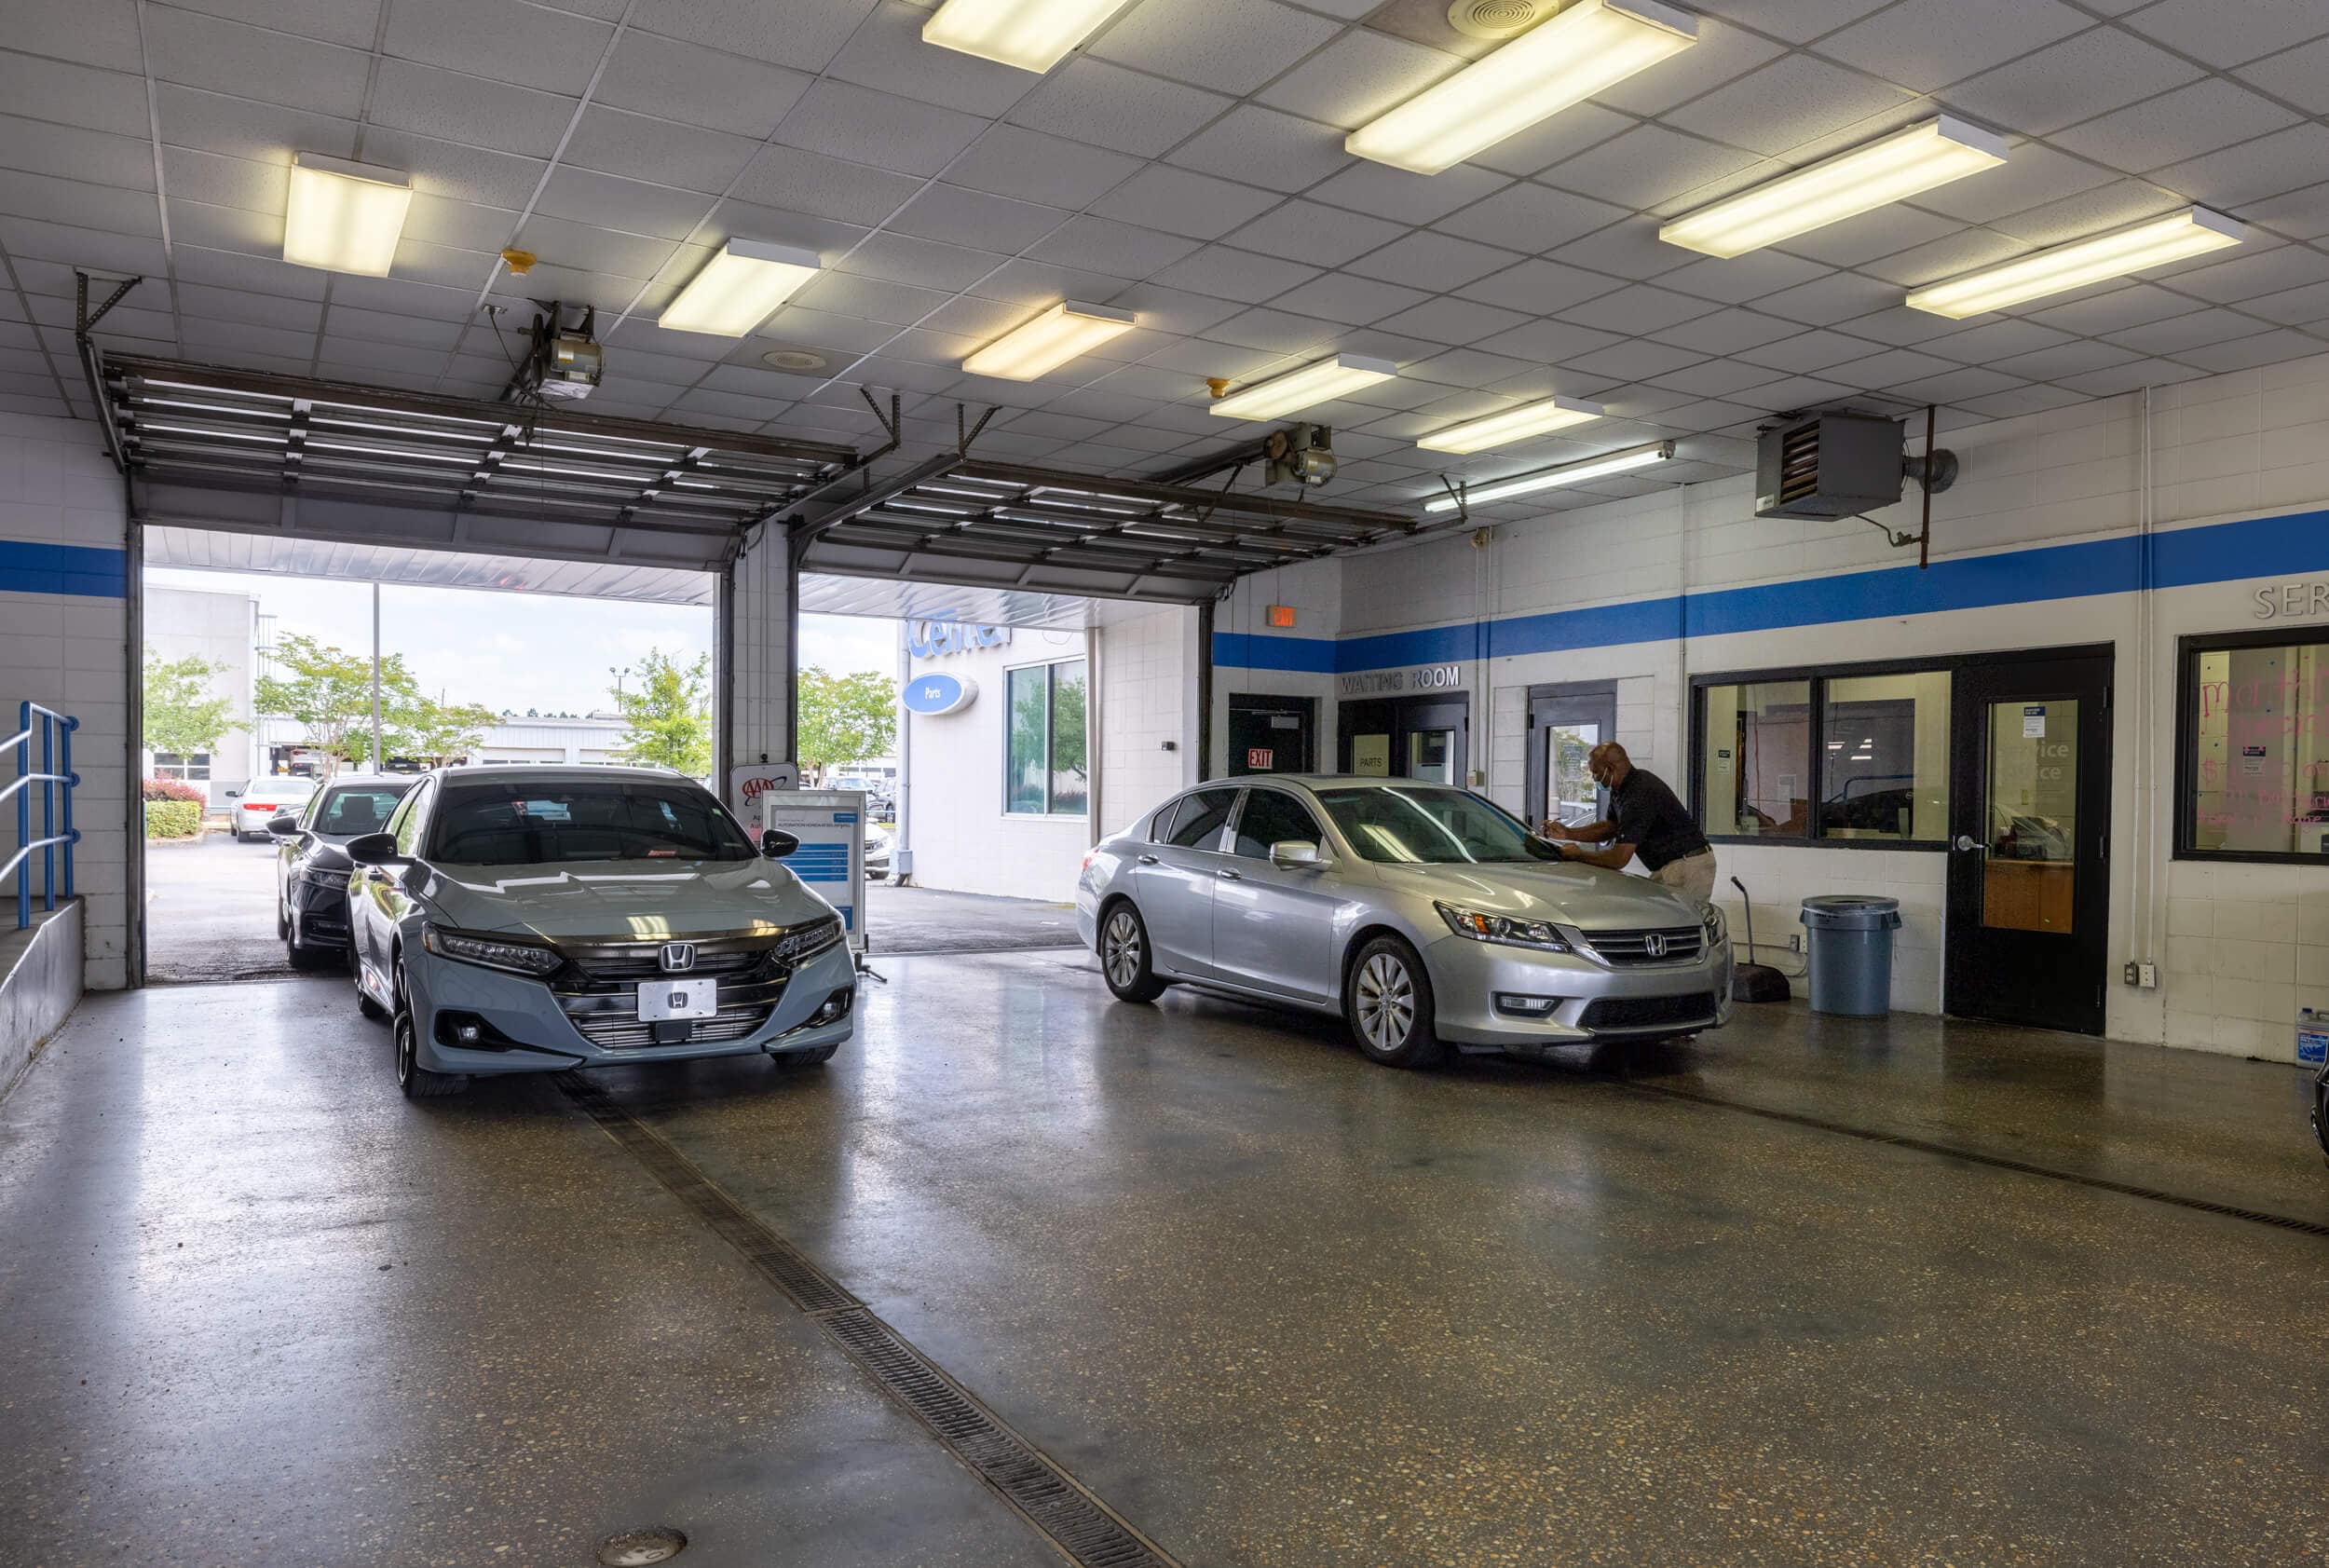 View photos and details of our entire new and used . Honda Service Center Near Me Mobile Al Autonation Honda At Bel Air Mall